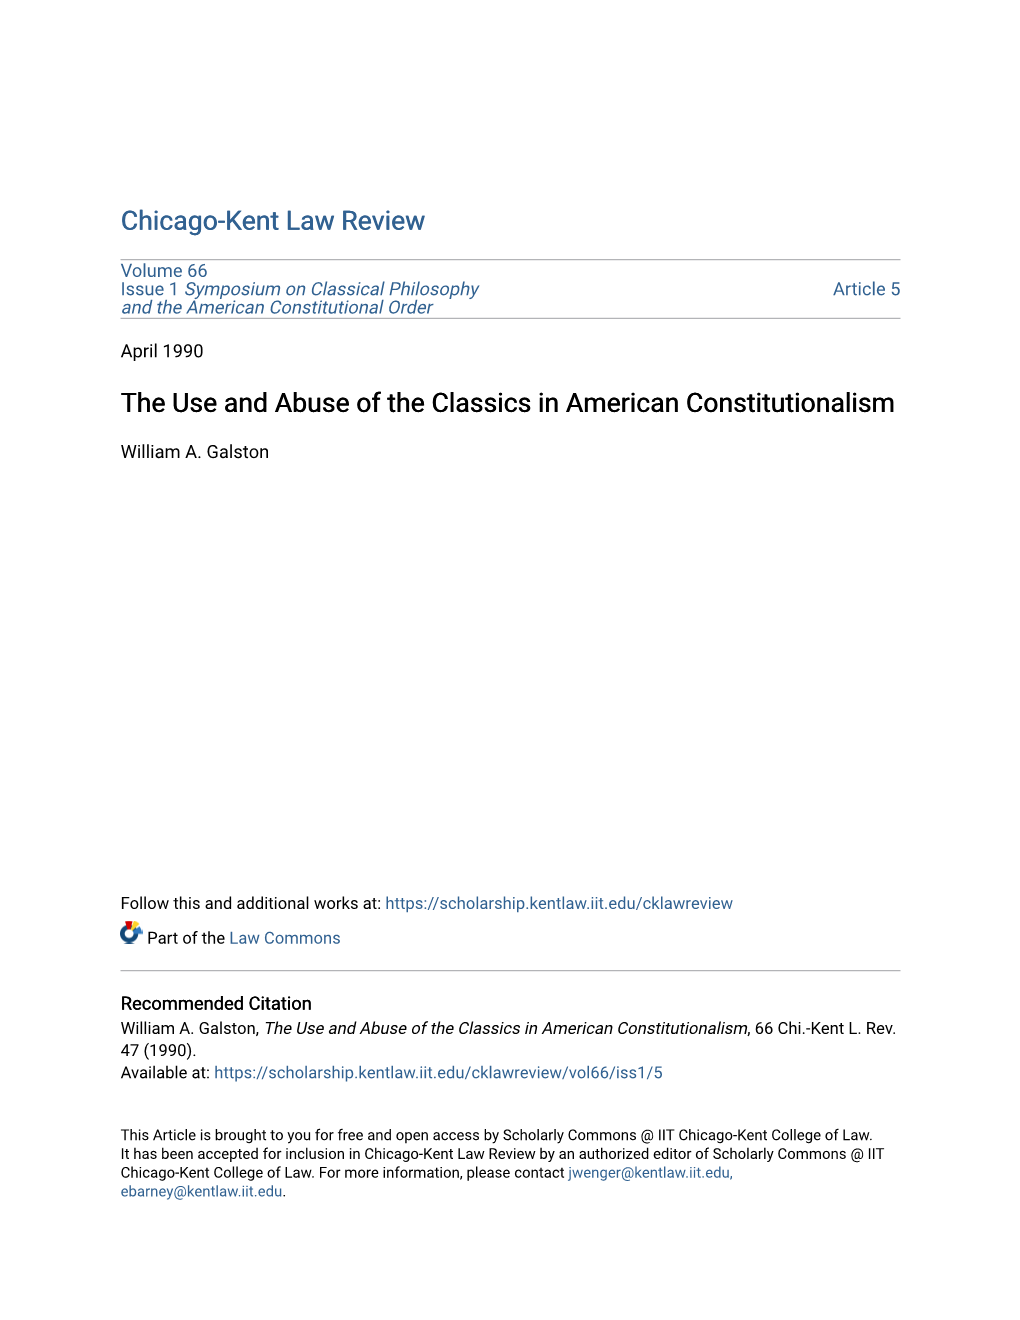 The Use and Abuse of the Classics in American Constitutionalism